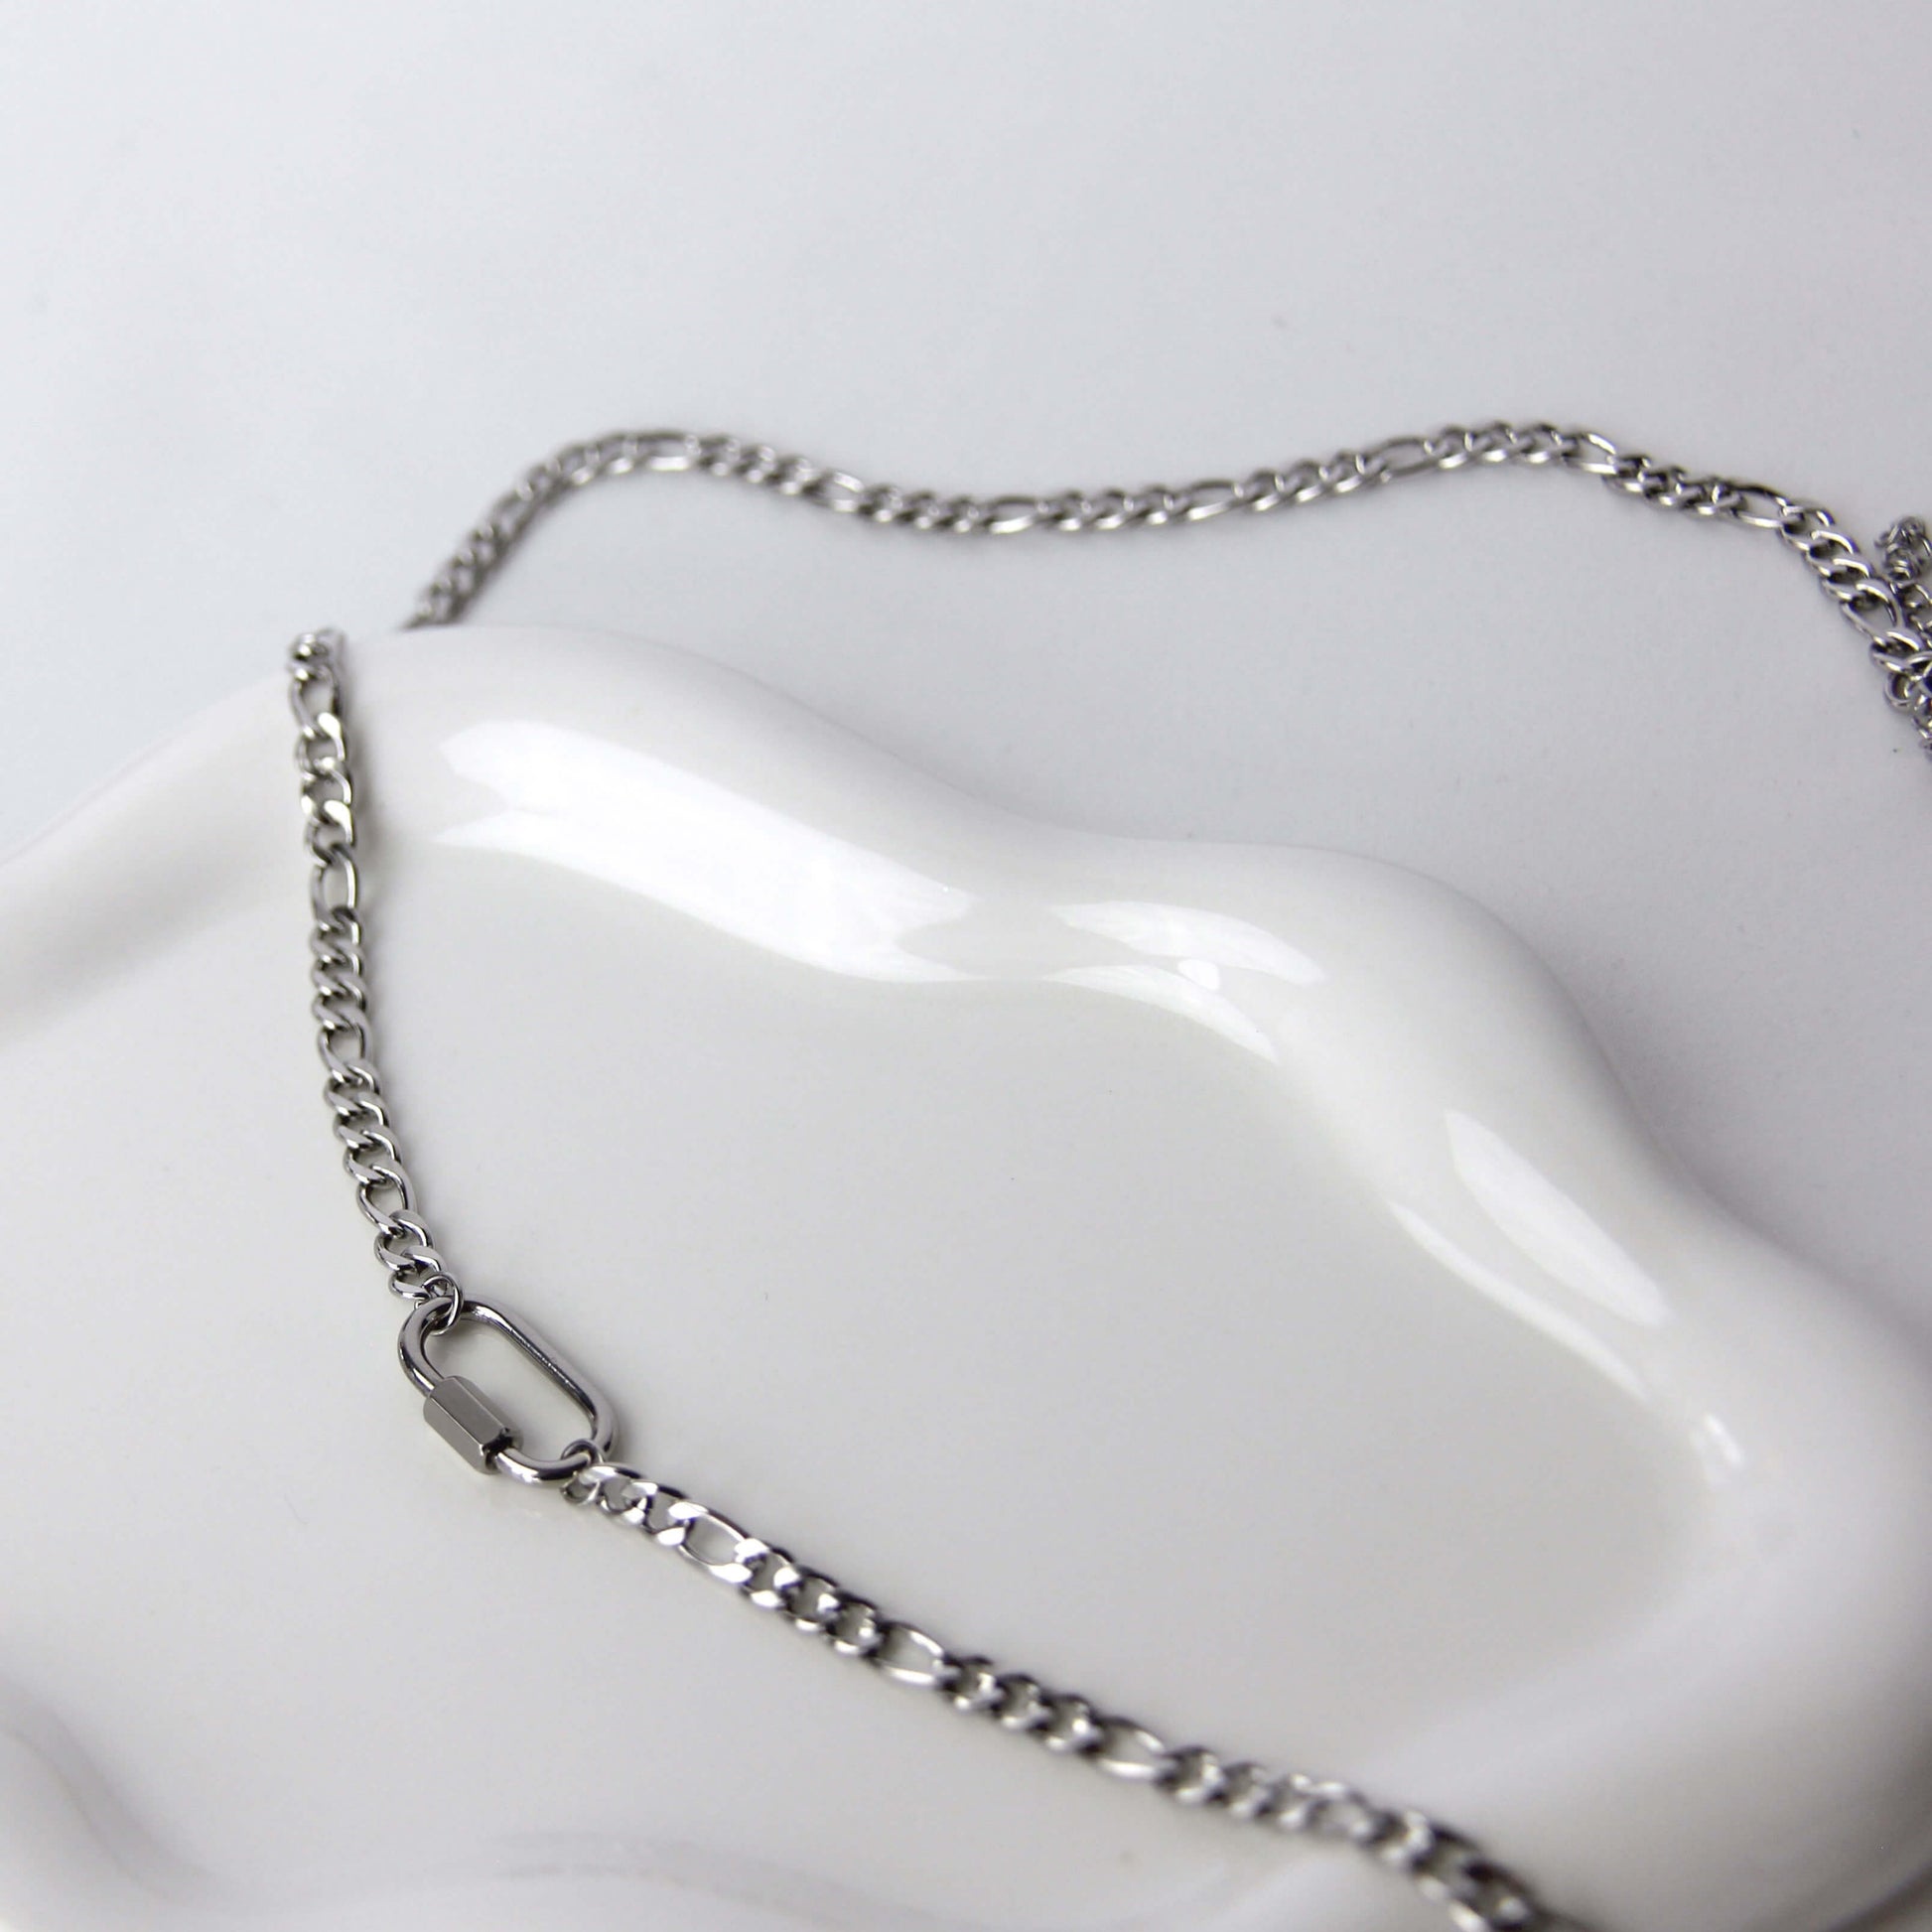 Silver Carabiner Pendant Necklace 4.5mm Figaro Chain For Men or Women - Necklace - Boutique Wear RENN